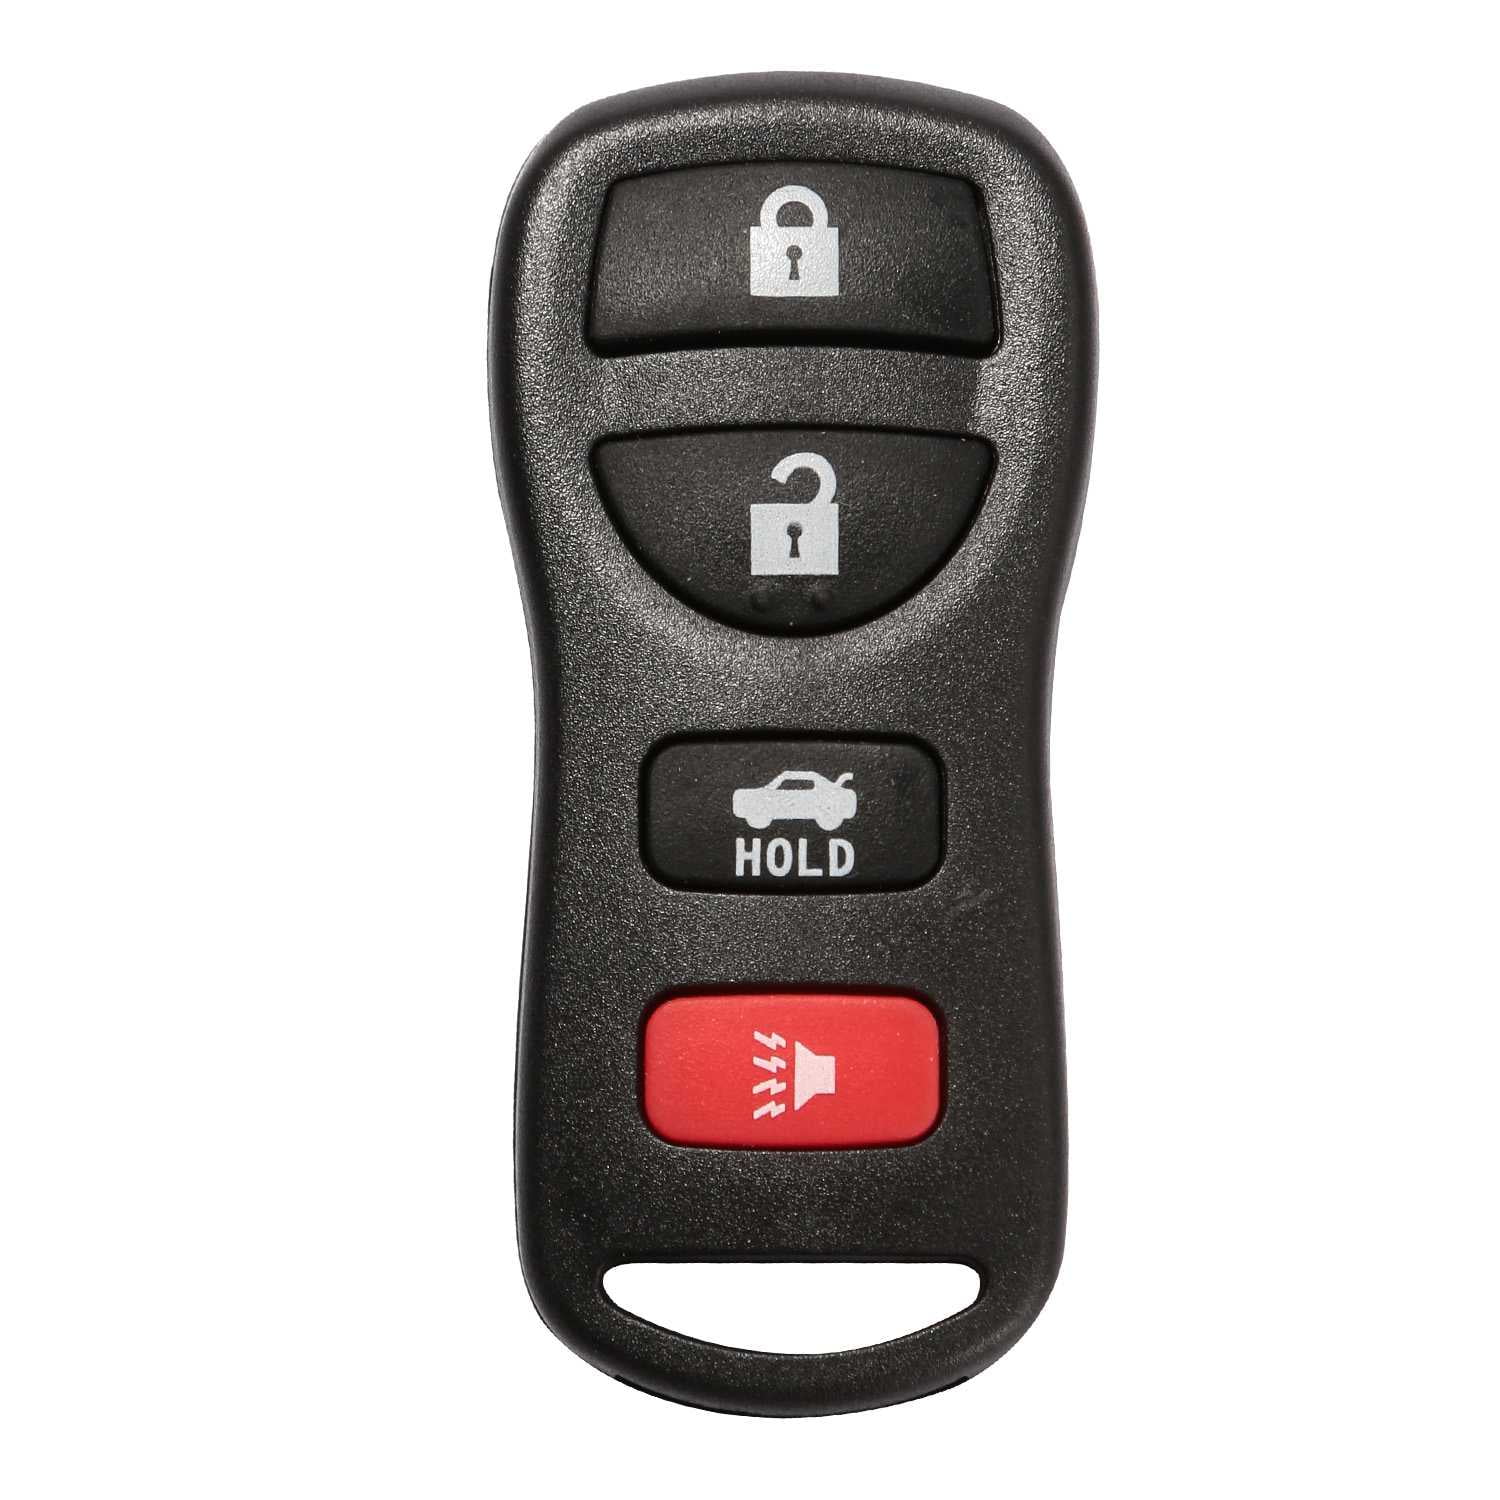 ANGLEWIDE Flip Key Fob Keyless Entry Remote Control 5 Buttons Black Replacement for Nissan Altima 13-15 2pads FCC 7812D-S180204 KR5S180144014 